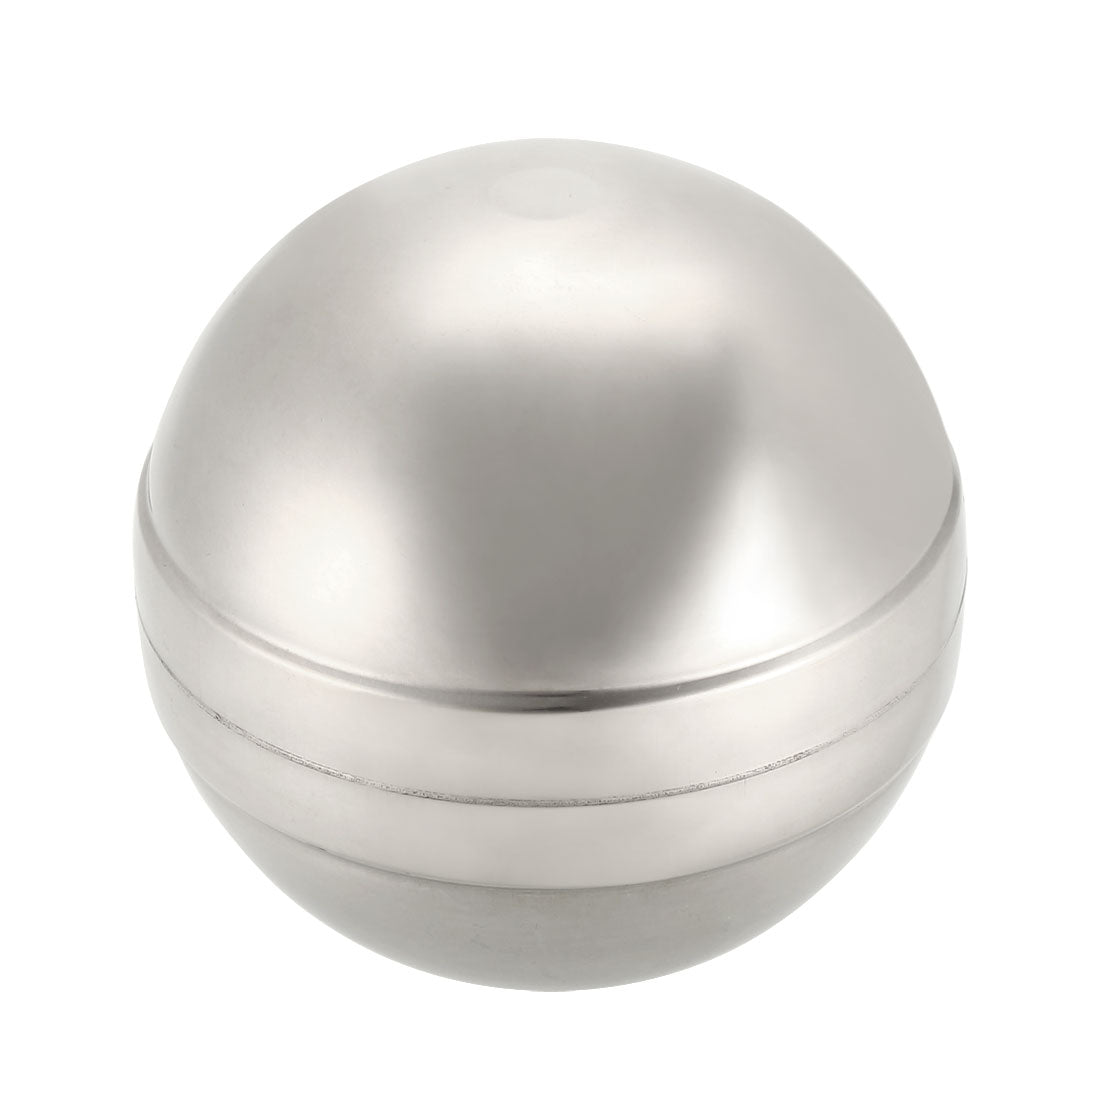 uxcell Uxcell 100mm/3.94inch M6 Stainless Steel Float Switch Floating Ball